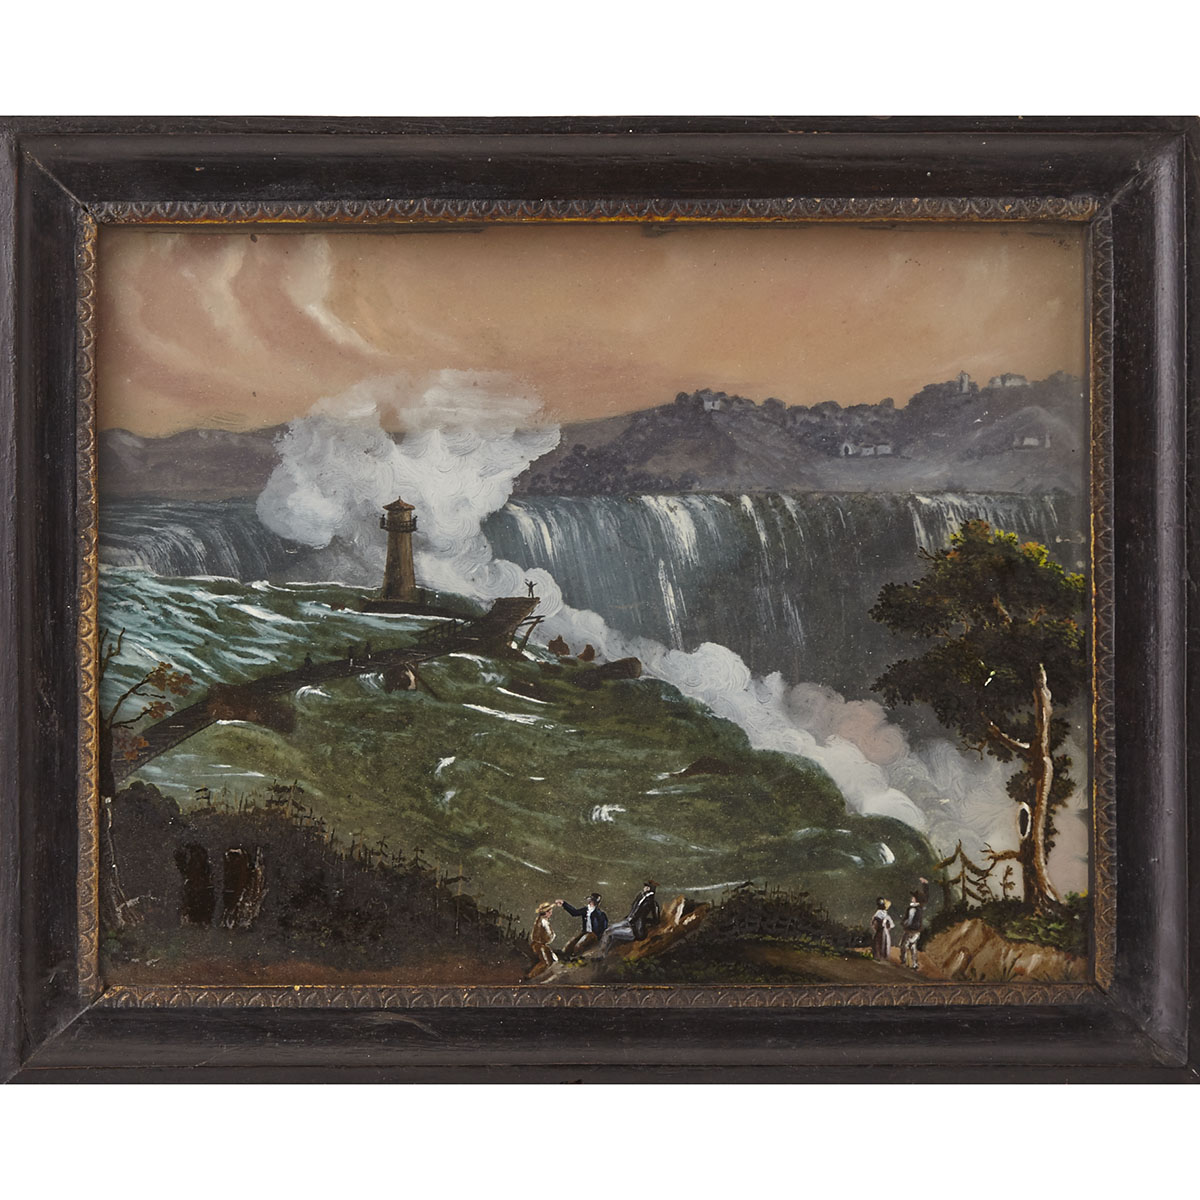 Reverse Painting on Glass of ‘The Horse Shoe Fall, Niagara, with the Tower’, 19th century